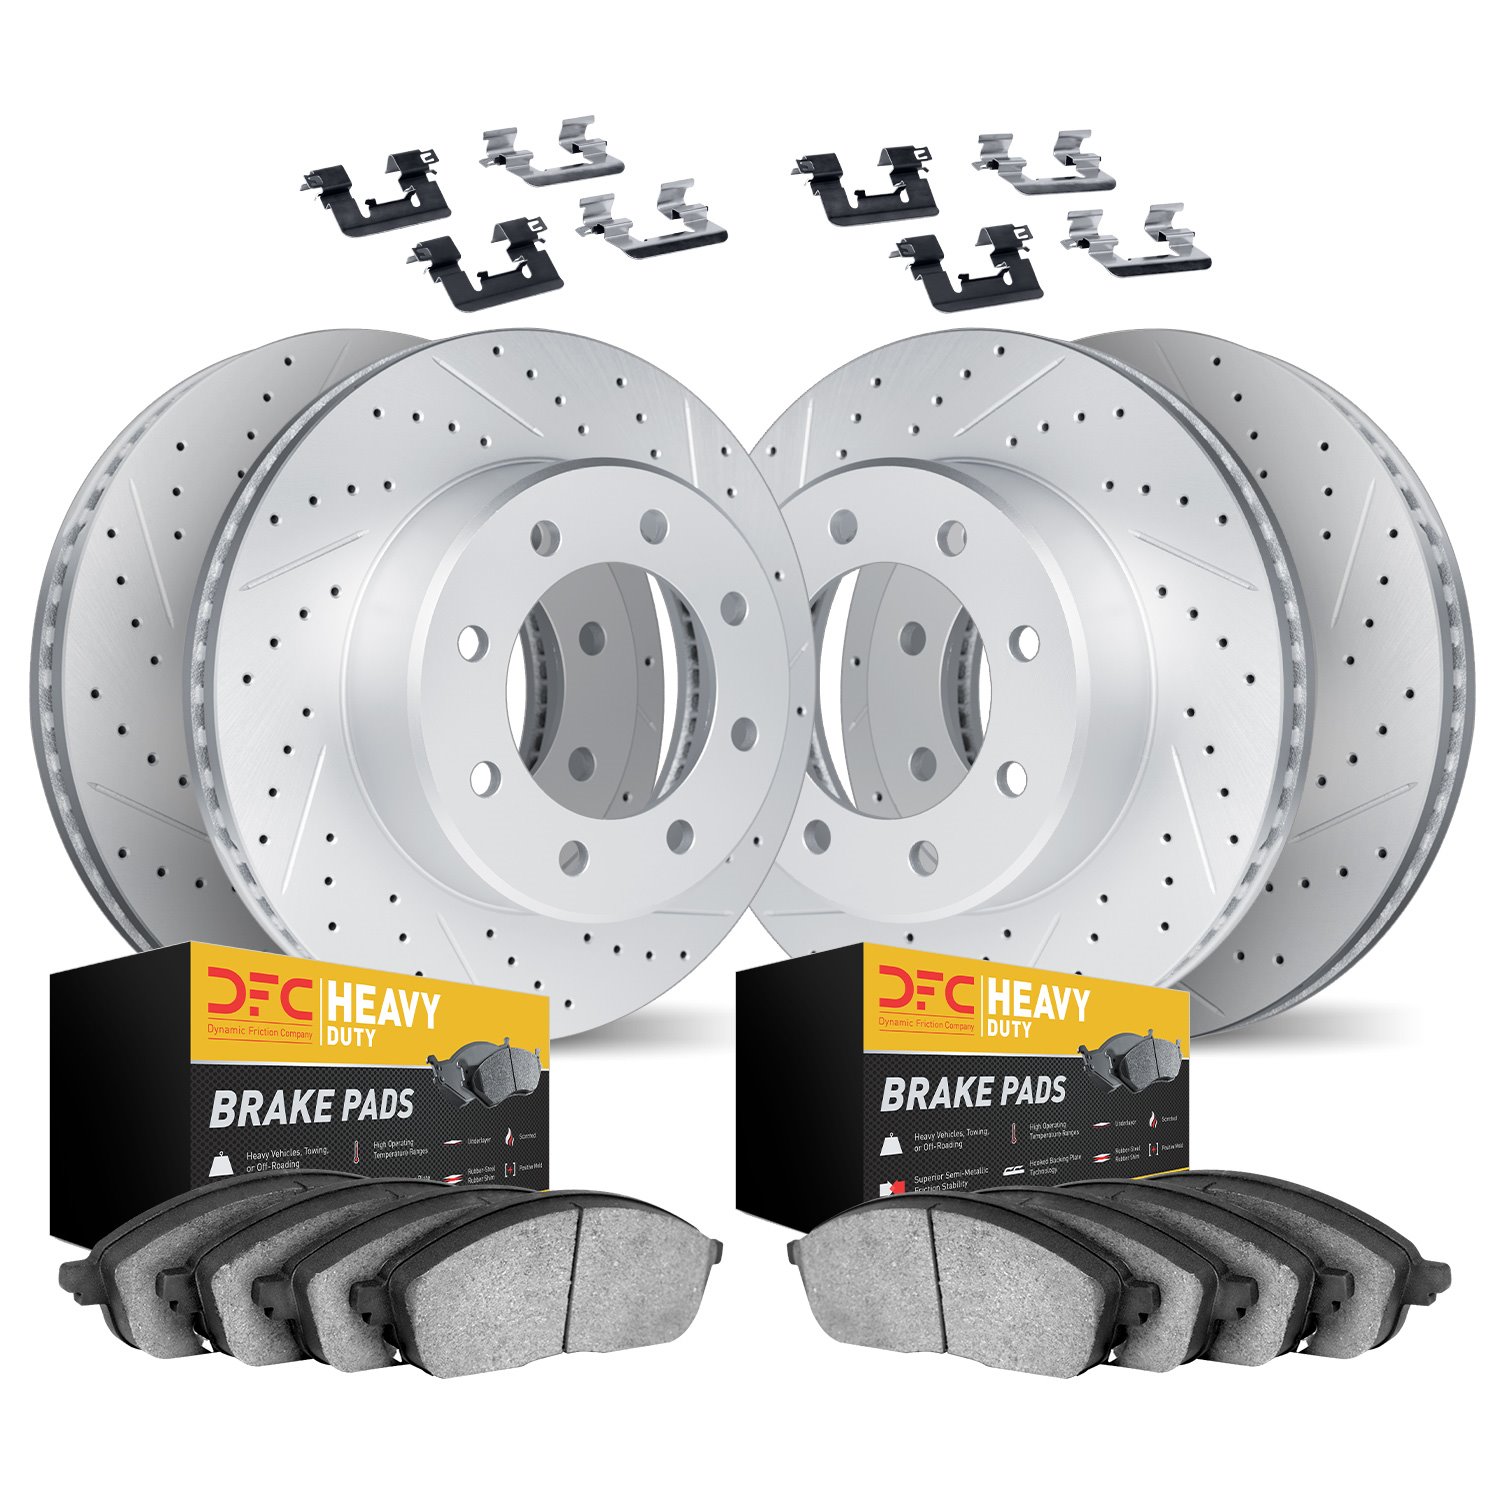 2214-99056 Geoperformance Drilled/Slotted Rotors w/Heavy-Duty Pads Kit & Hardware, 2003-2005 Ford/Lincoln/Mercury/Mazda, Positio